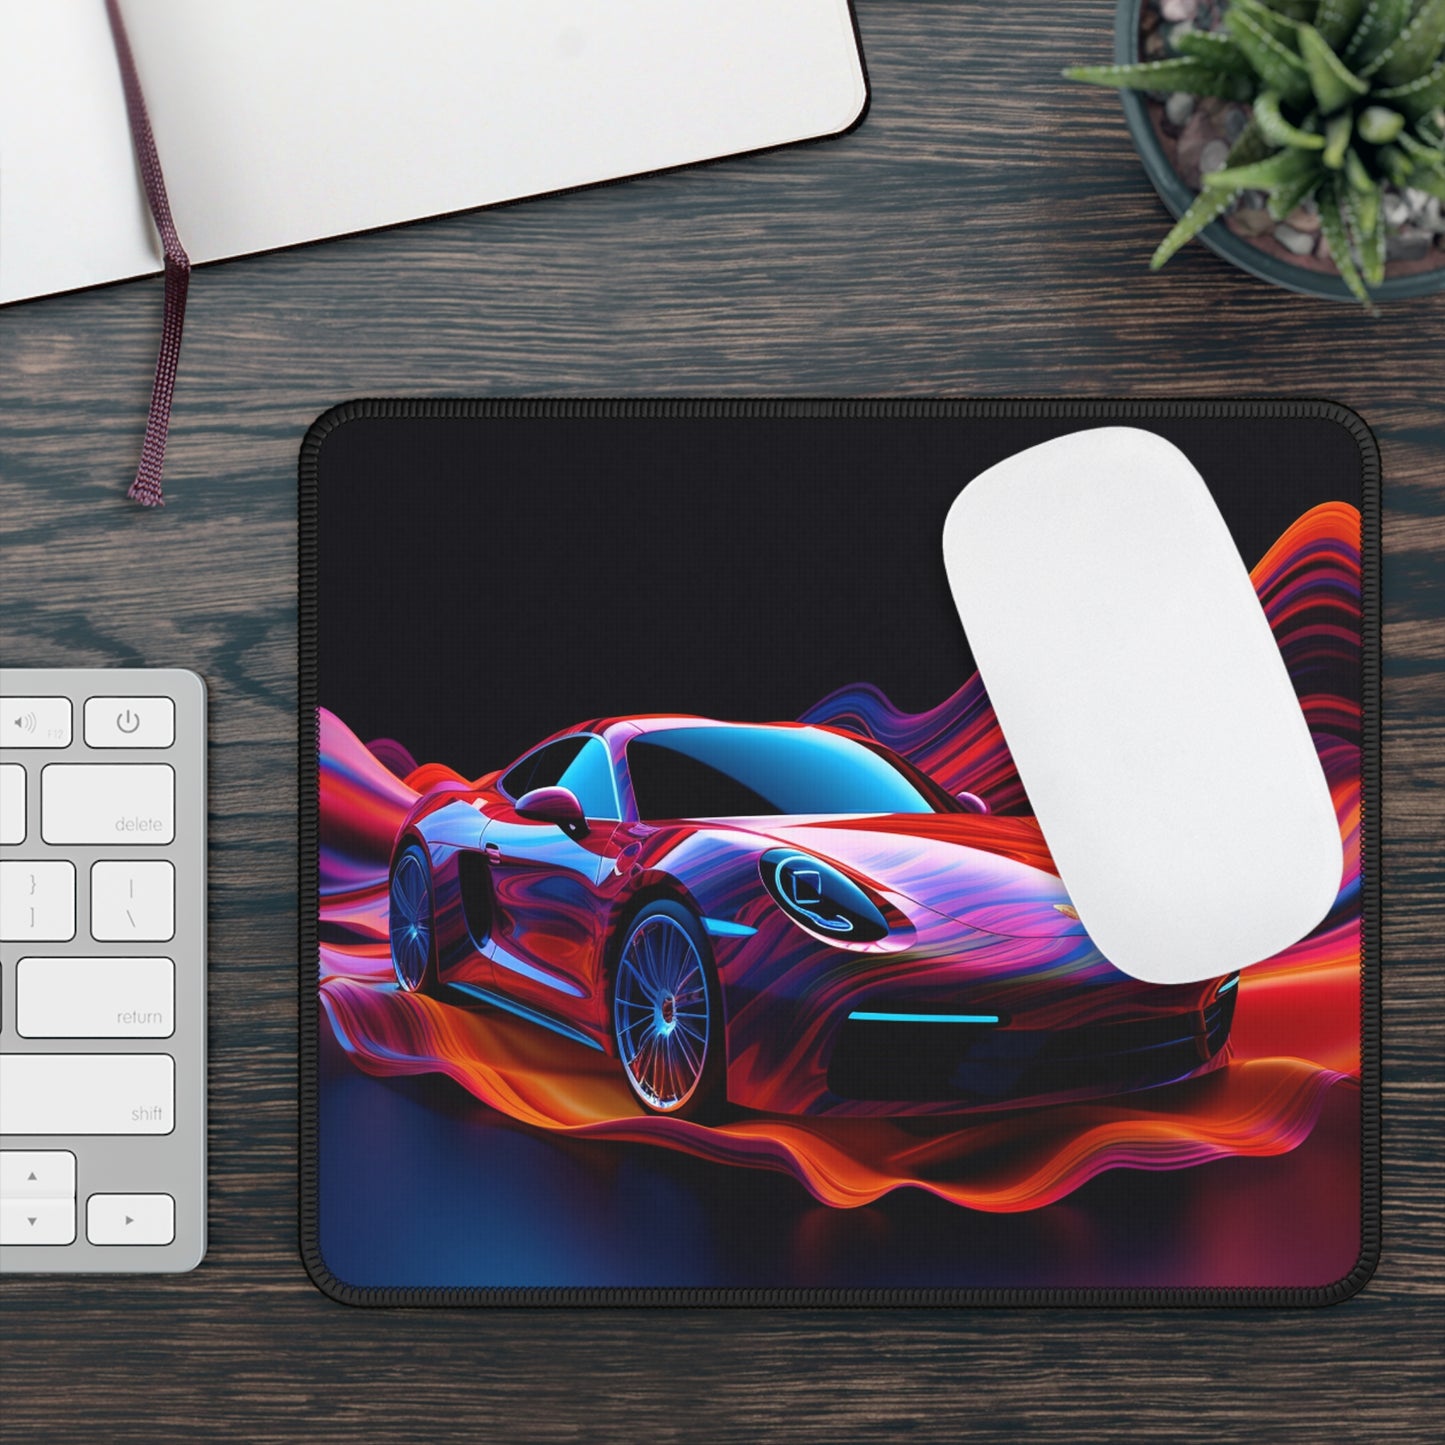 Gaming Mouse Pad  Porsche Water Fusion 4